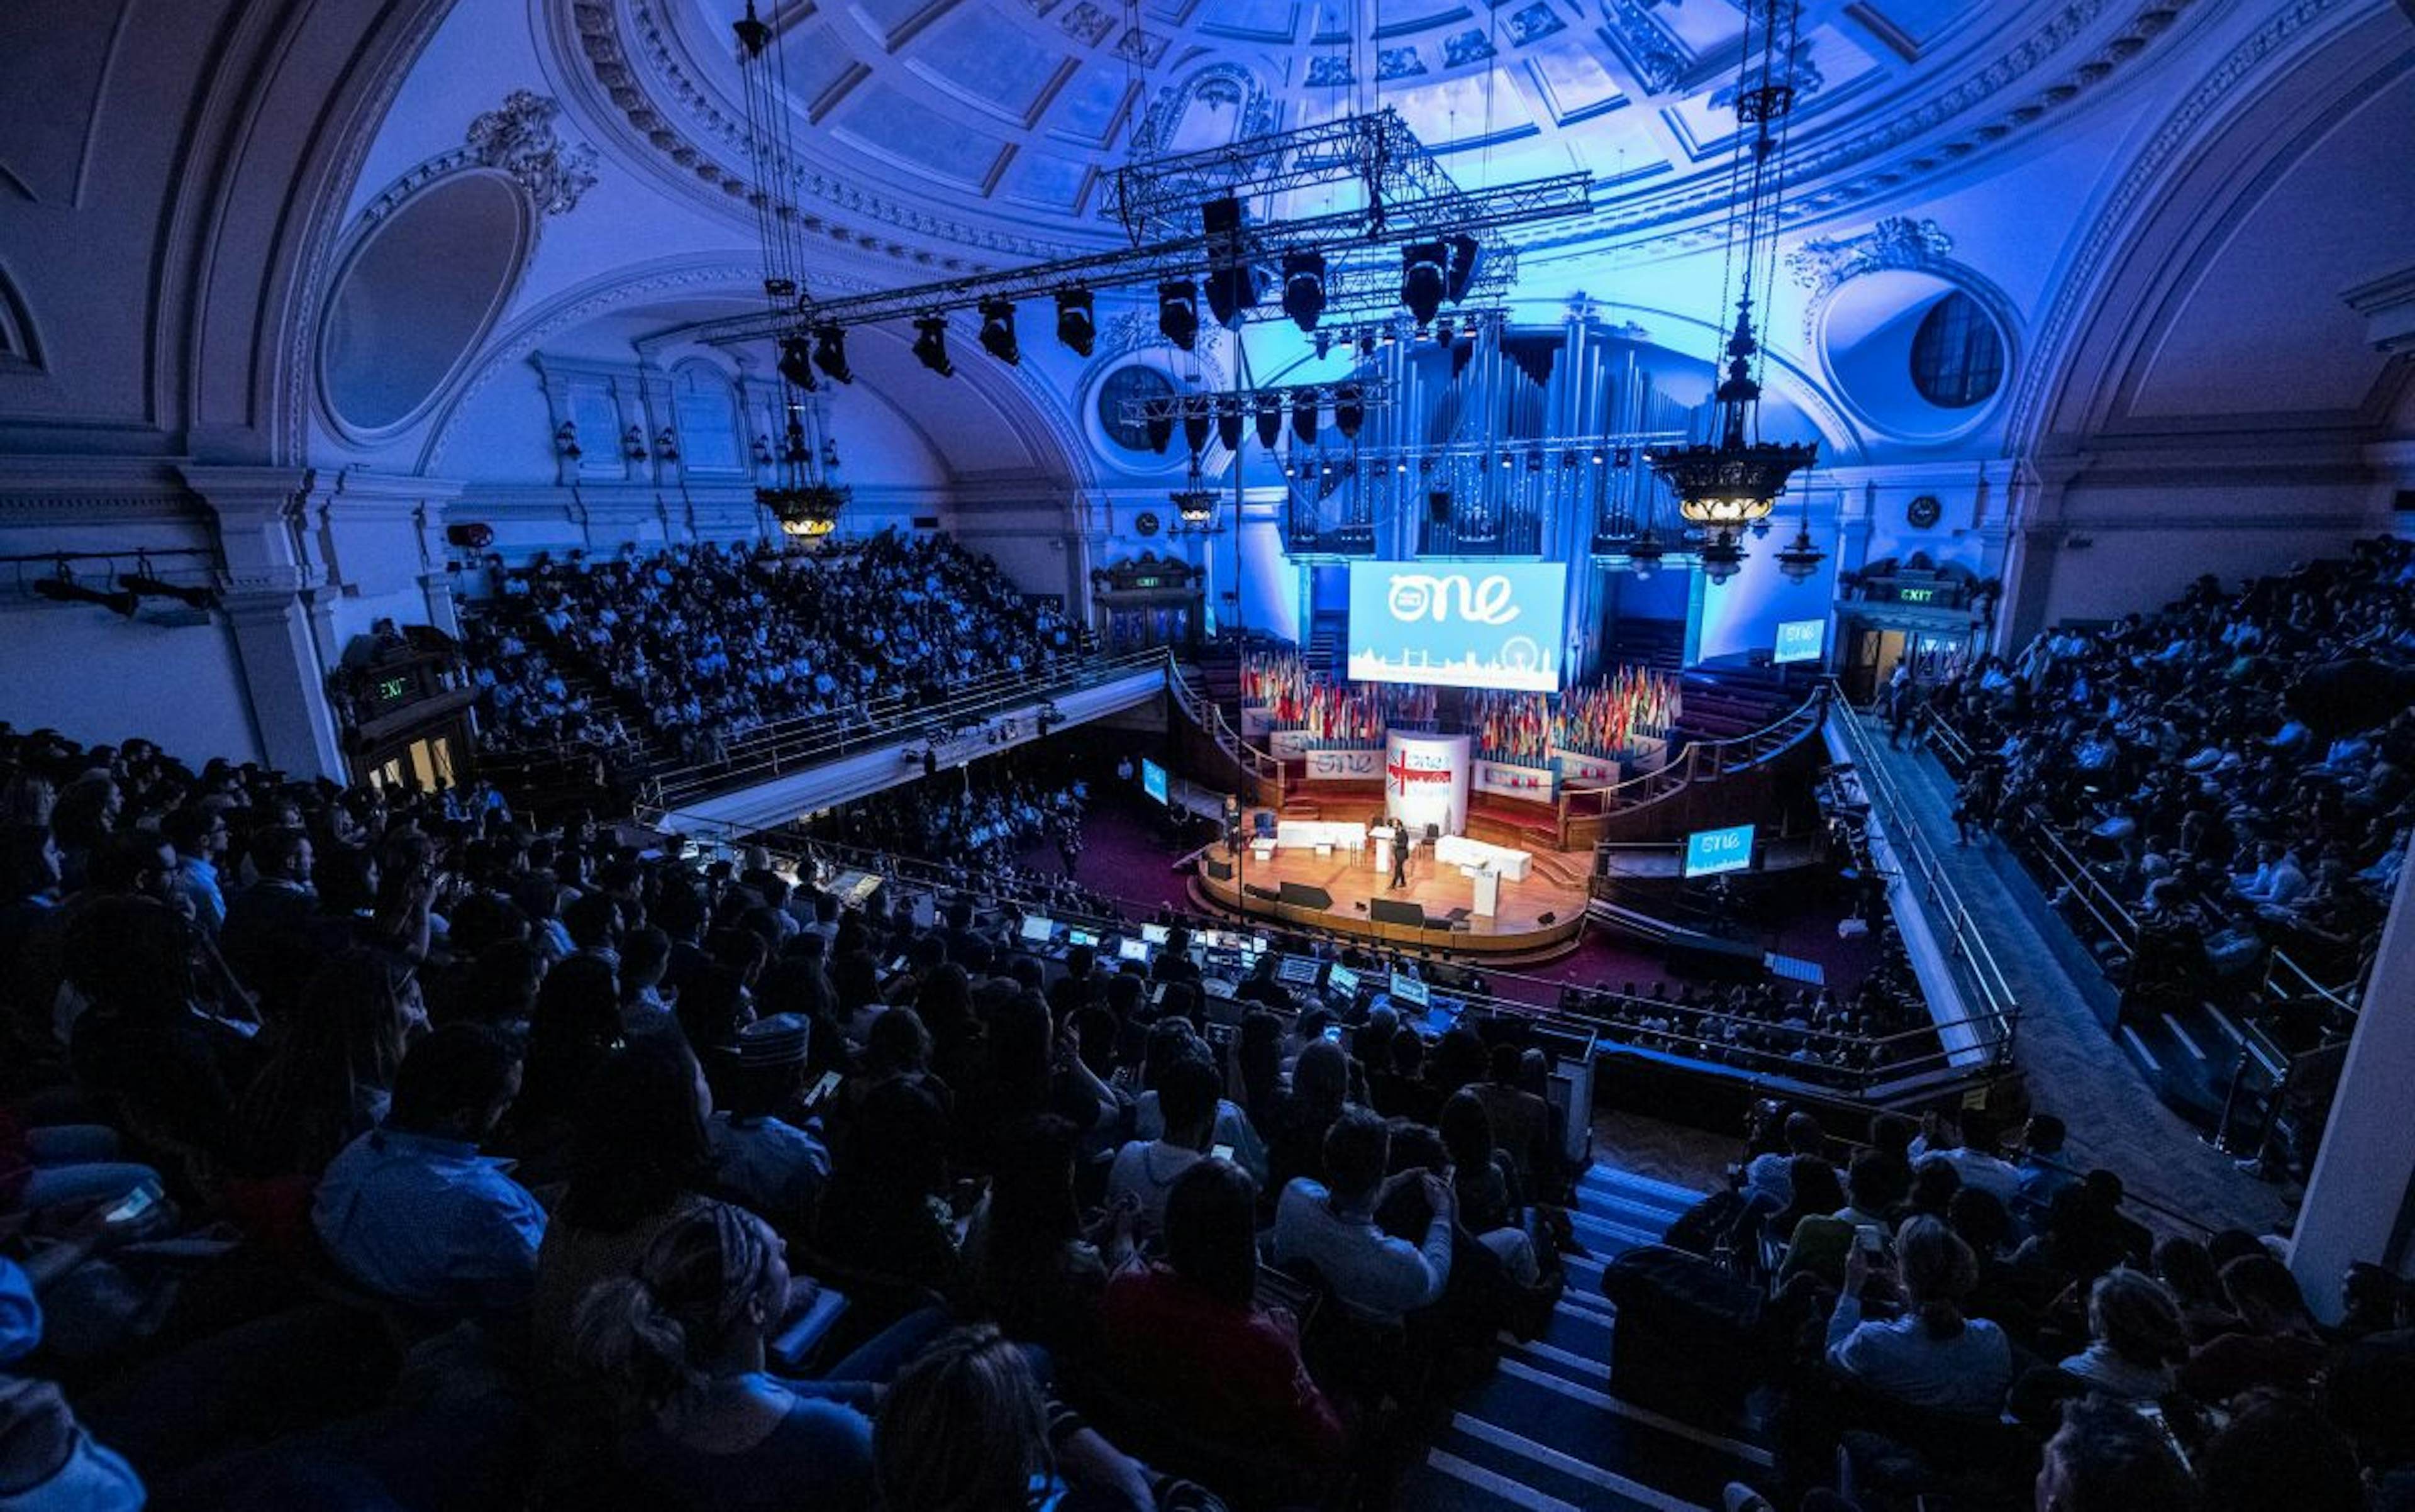 Central Hall Venues - EVENTSBASE